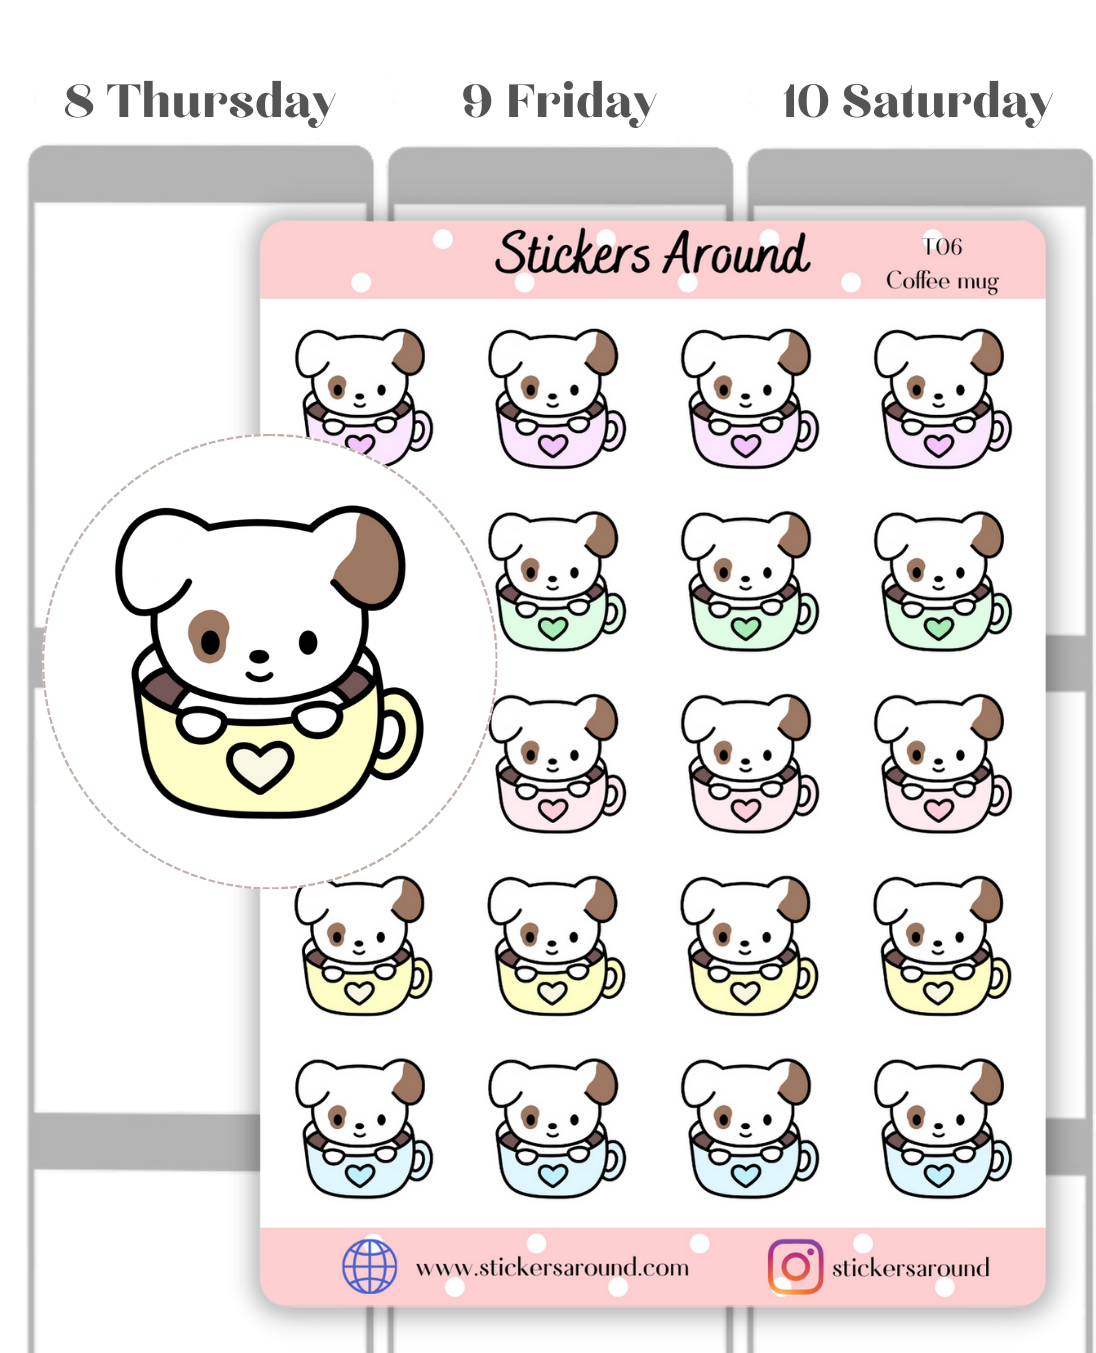 Cute Printable Coffee Planner Stickers ⋆ The Petite Planner